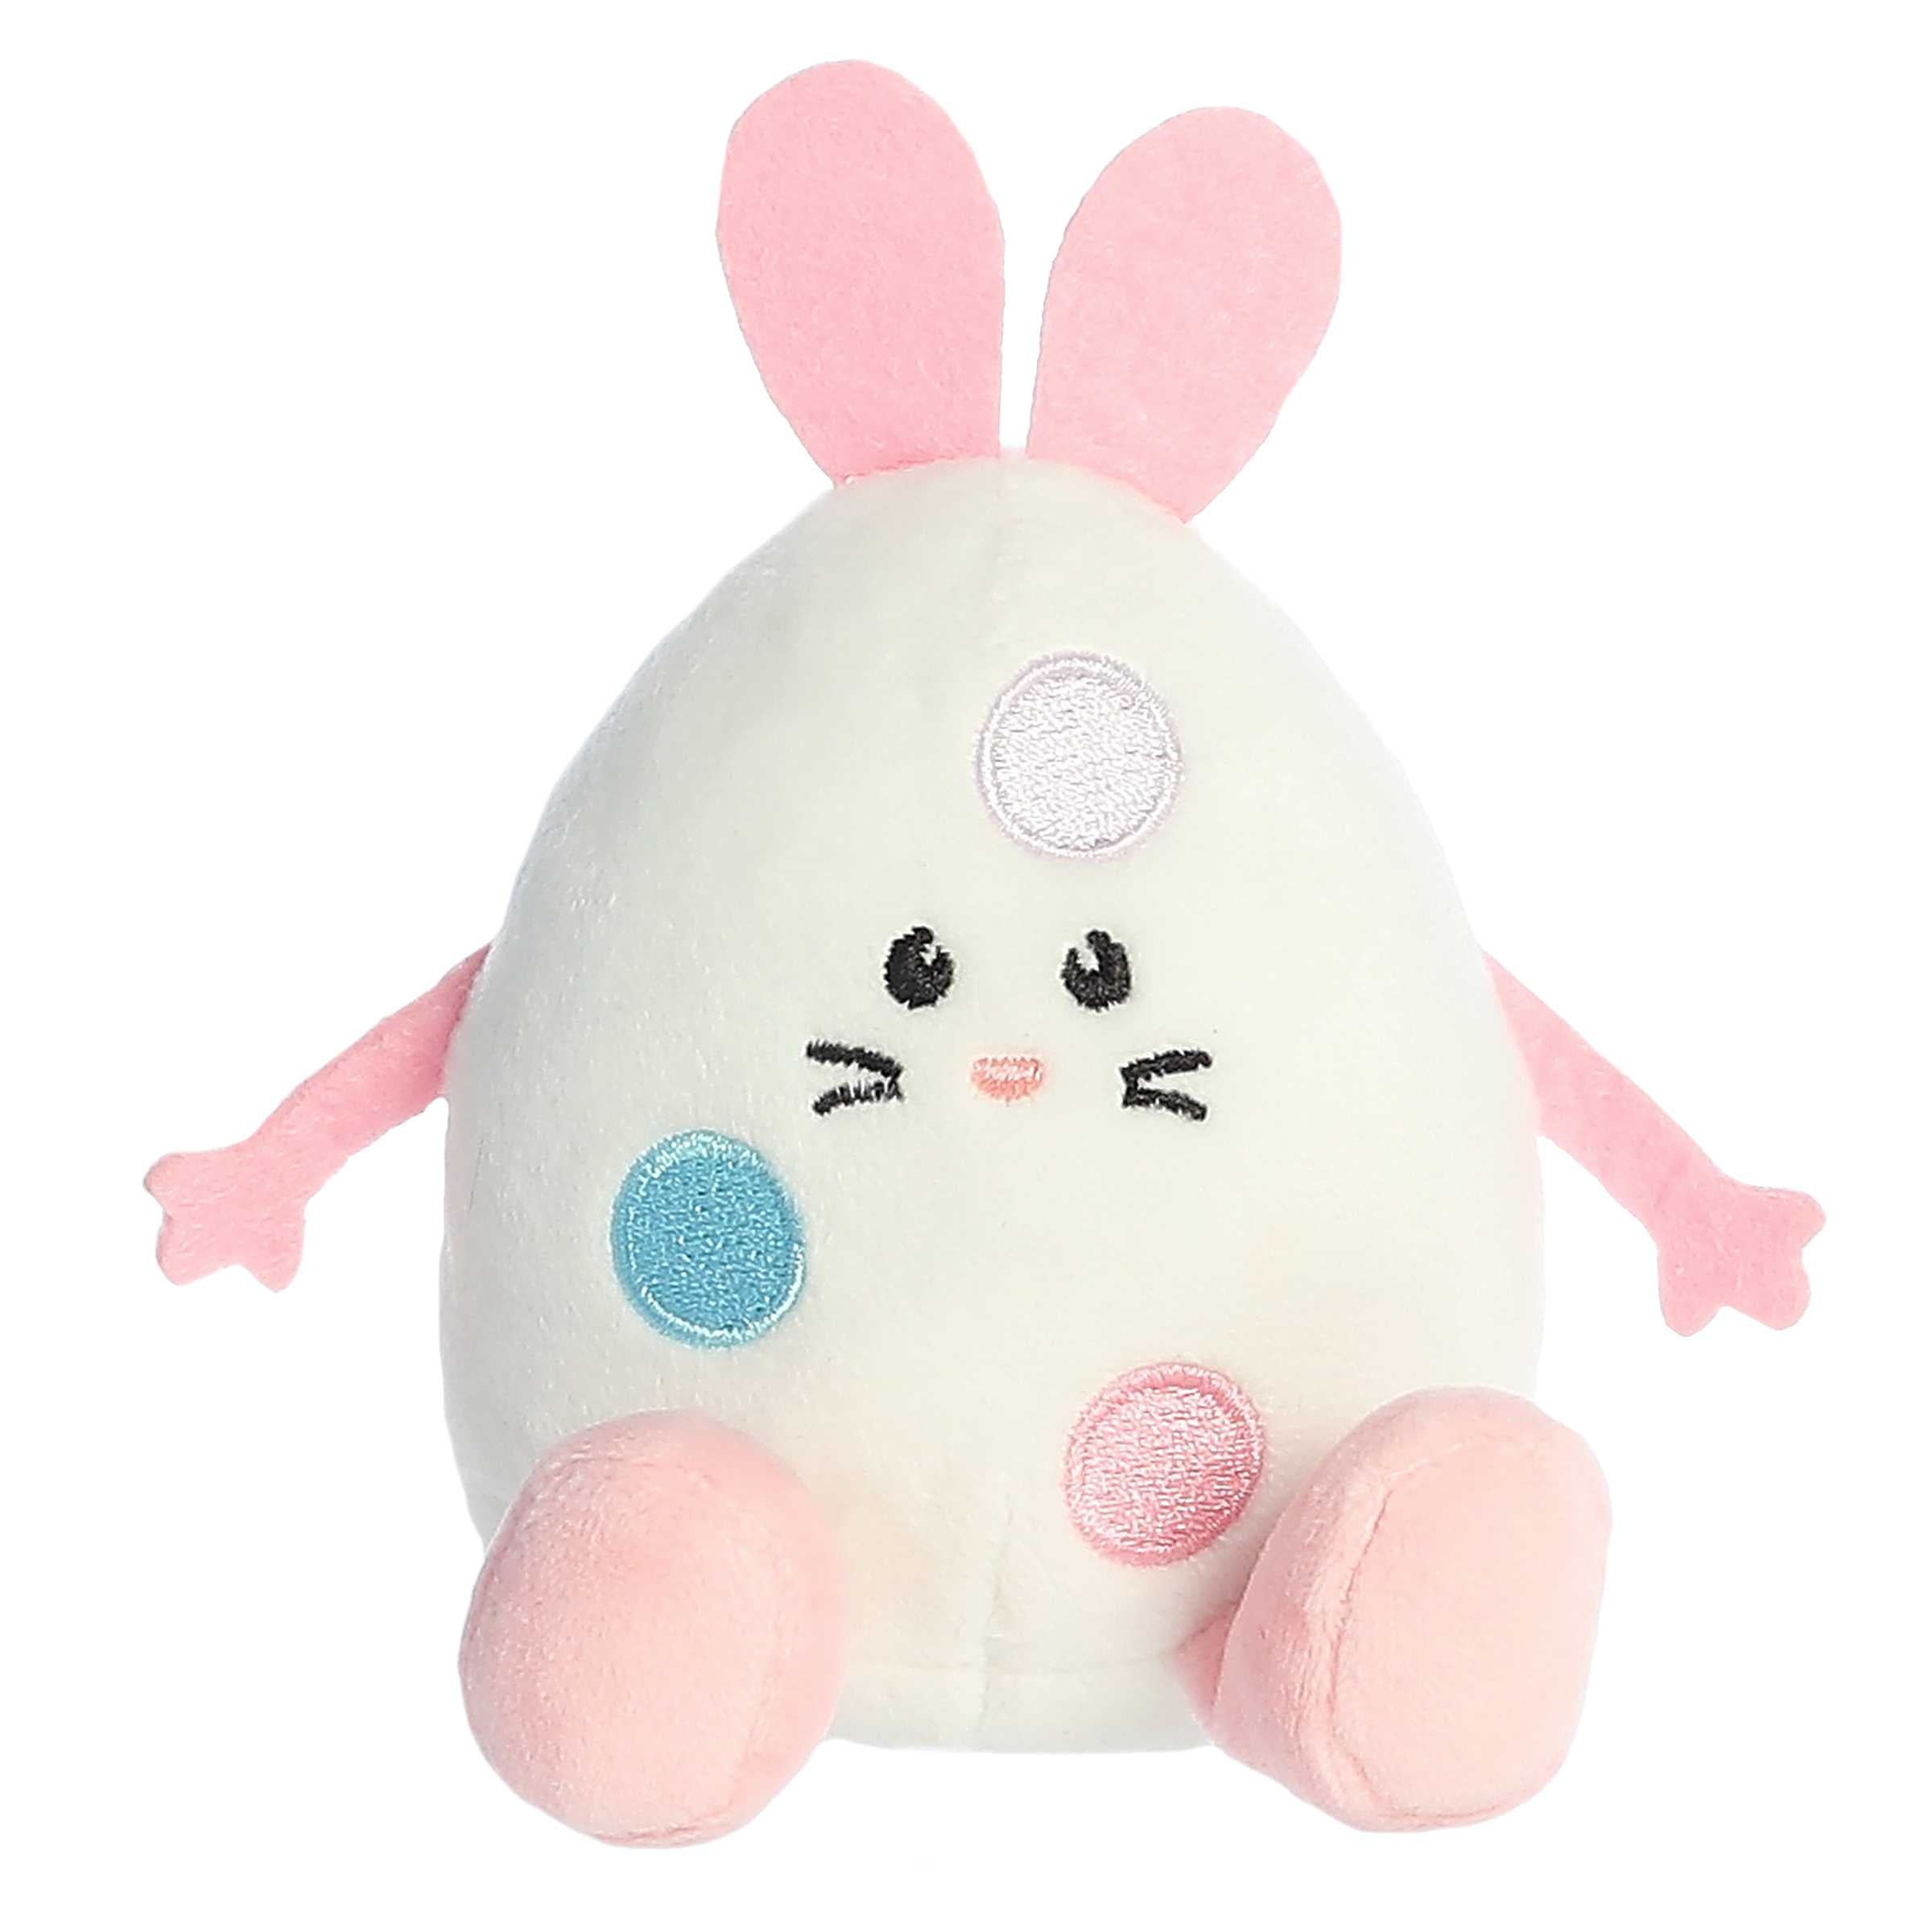 Easter Egg plush from Eggspressions, whimsical pastel design on a white and pink egg plush, perfect for Easter basket gifts